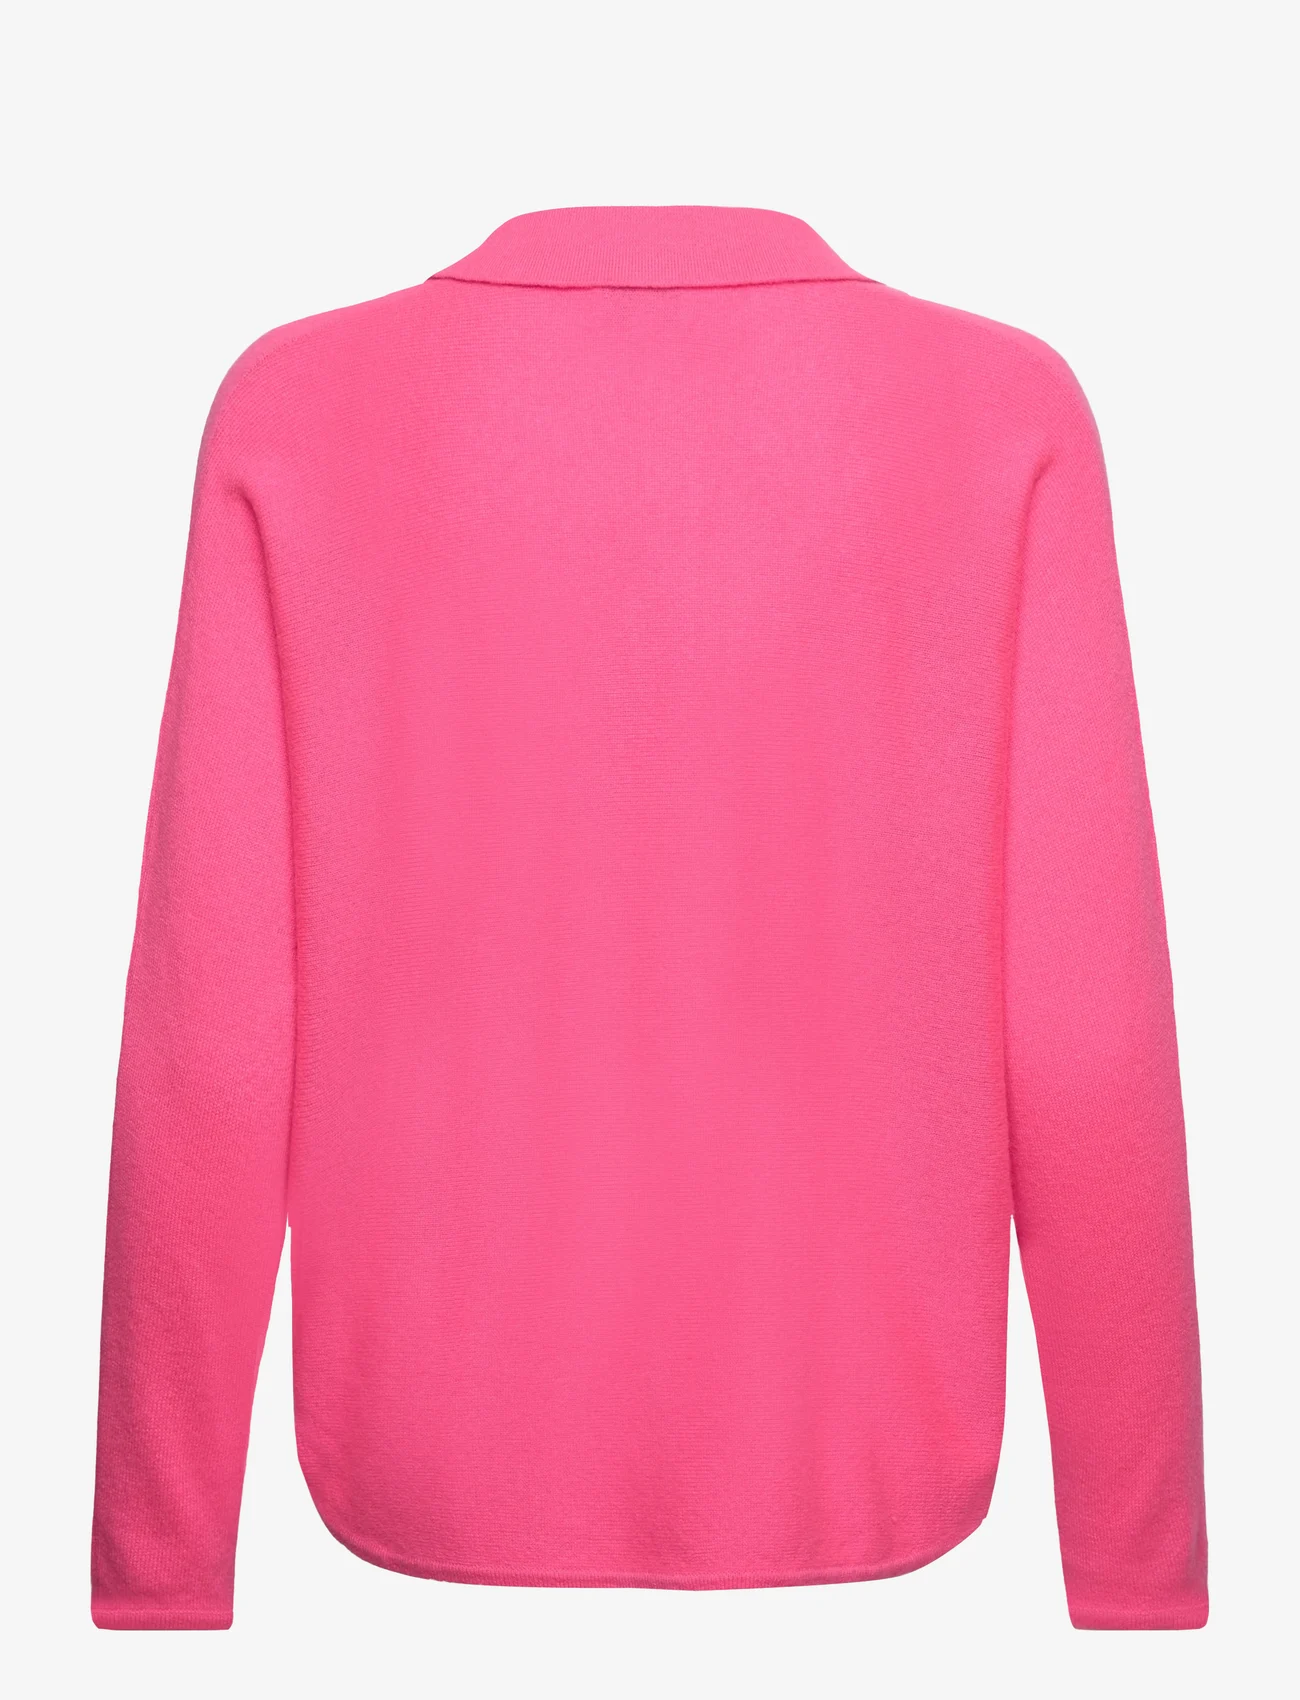 Davida Cashmere - Curved Open Collar - pullover - candy pink - 1